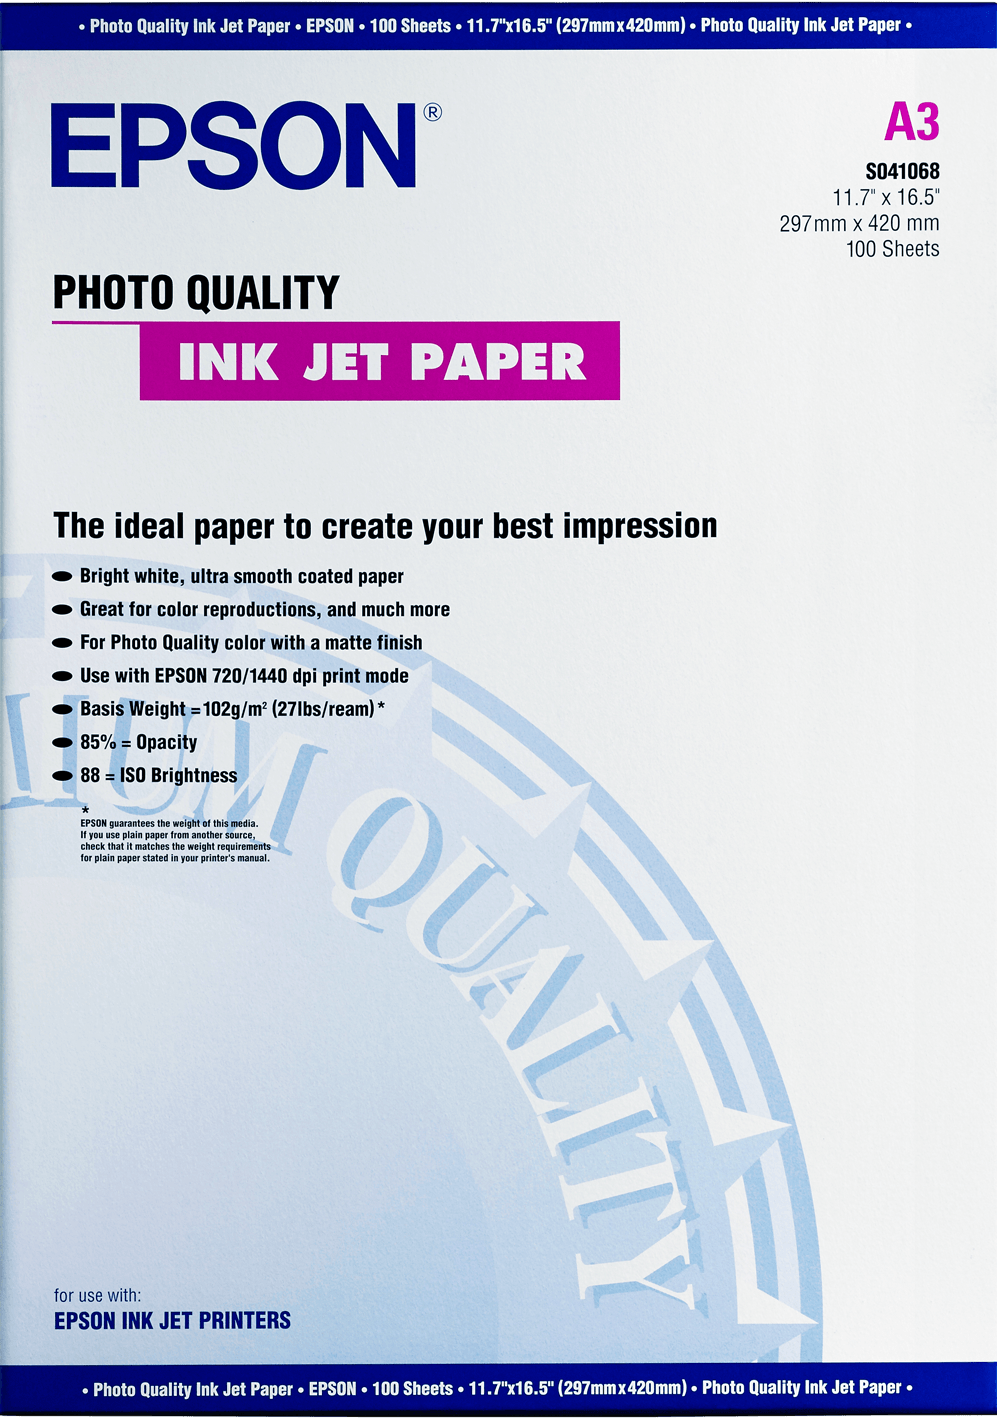 Epson C13S041069 Photo Quality Ink Jet Paper. The ideal paper to create your best impression